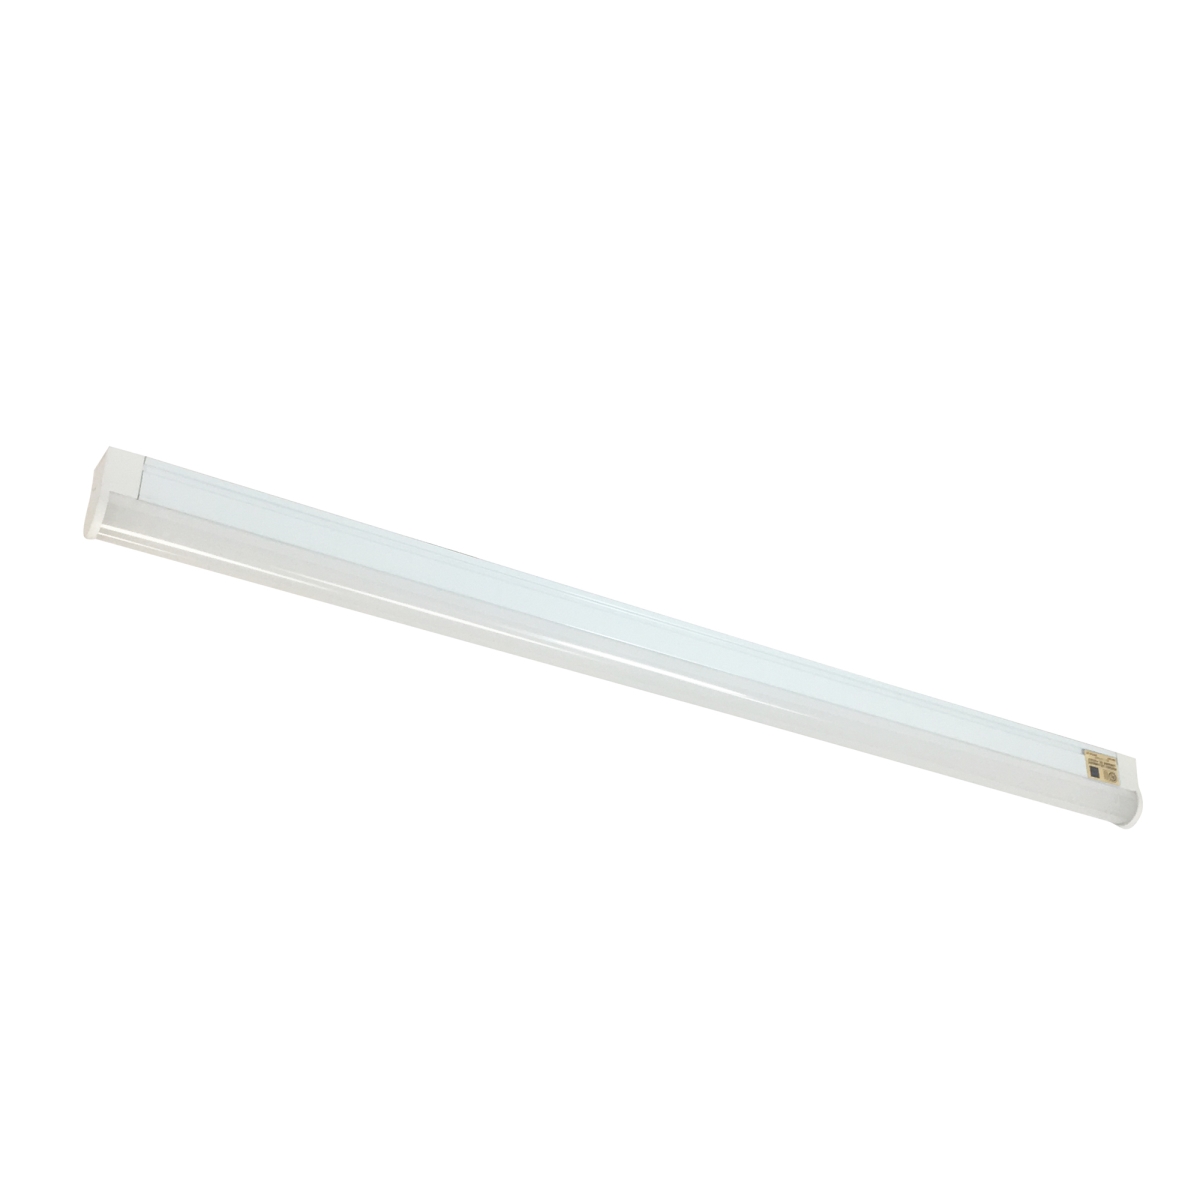 Picture of Nora Lighting NULS-LED2130W 21 in. 3000K Undercabinet Linear LED Fixture - White